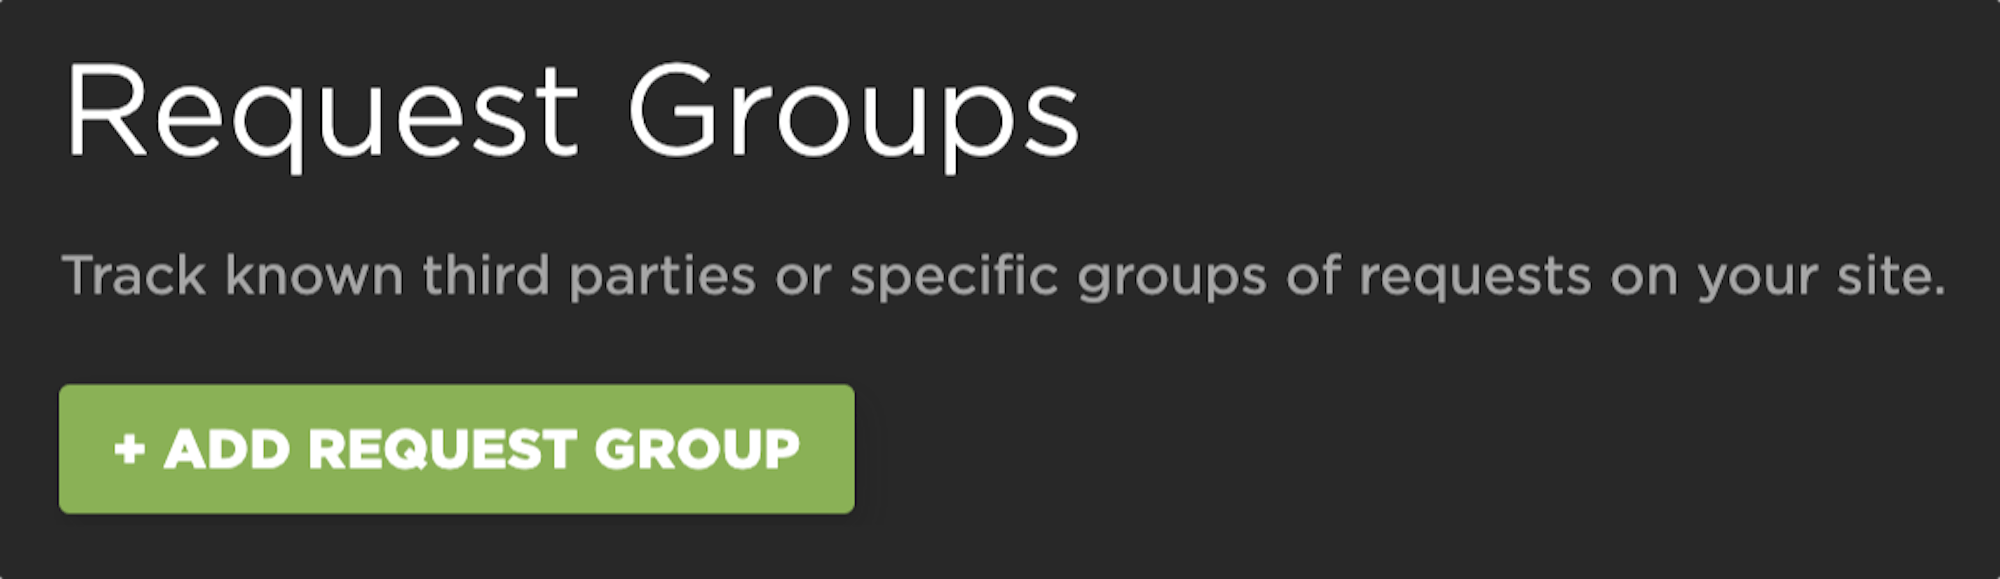 Request group configuration in settings